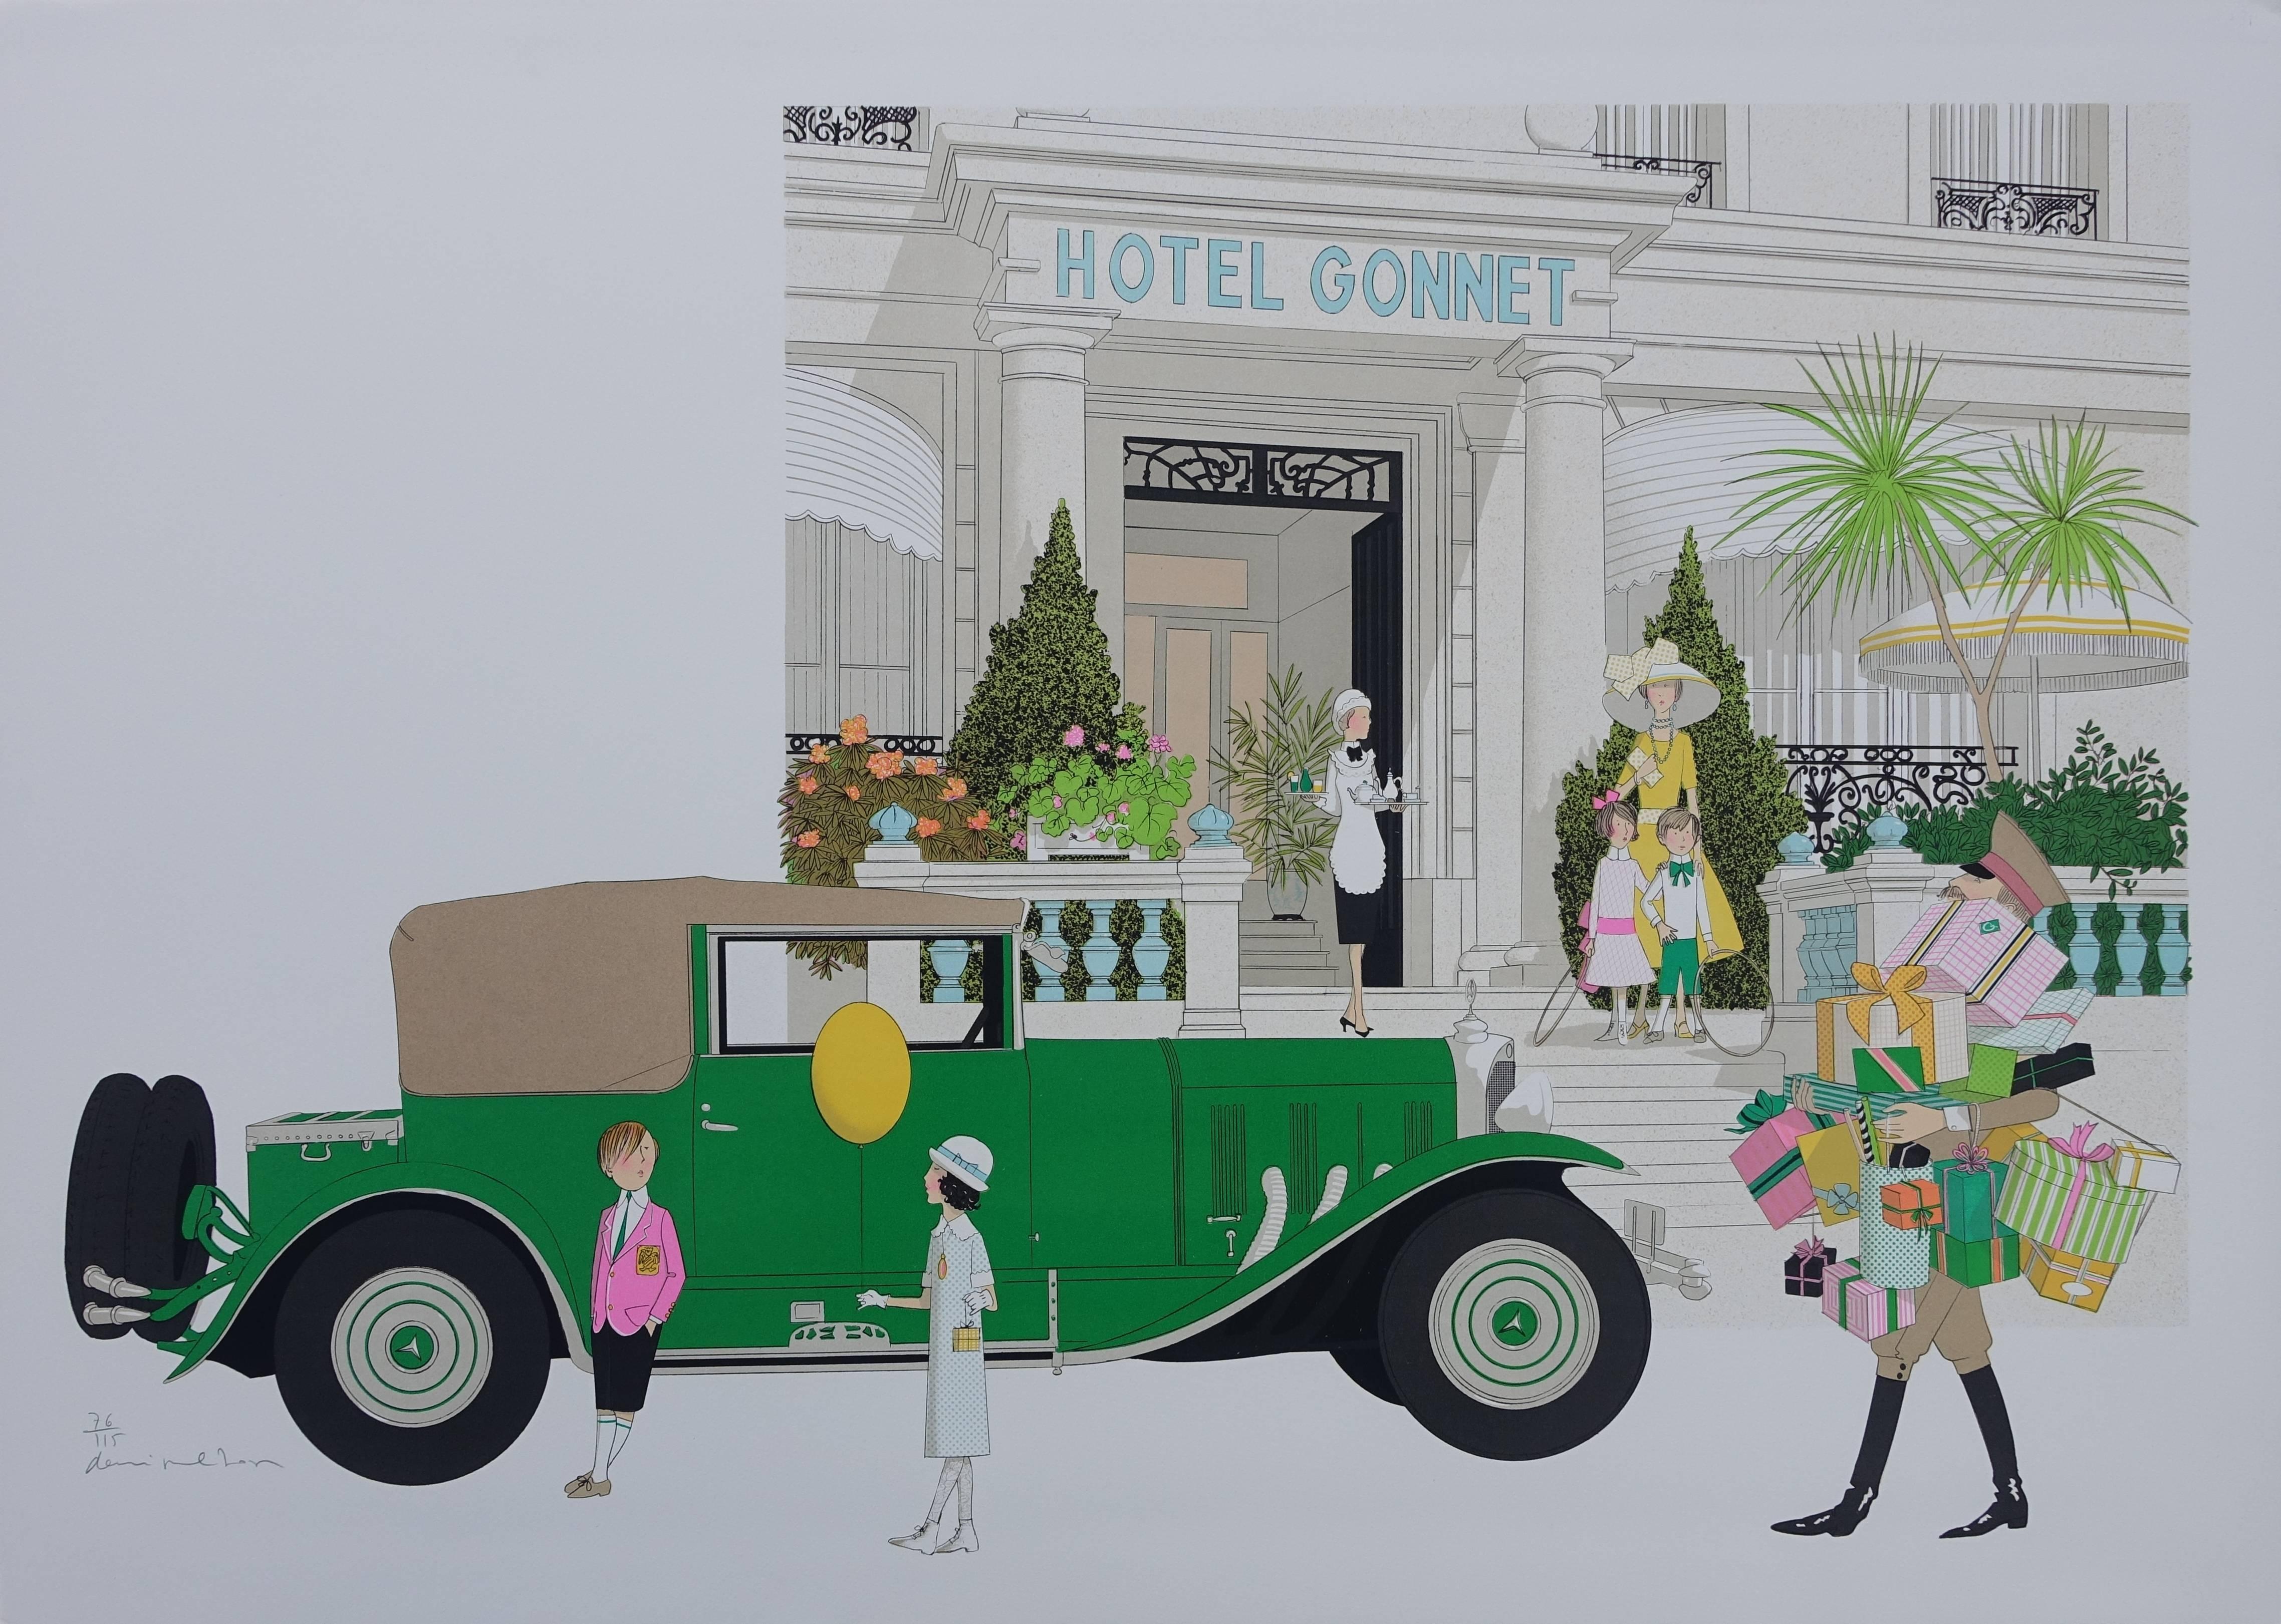 Denis Paul Noyer Figurative Print - Mercedes 370 and Hotel Gonnet - Signed lithograph - 115ex